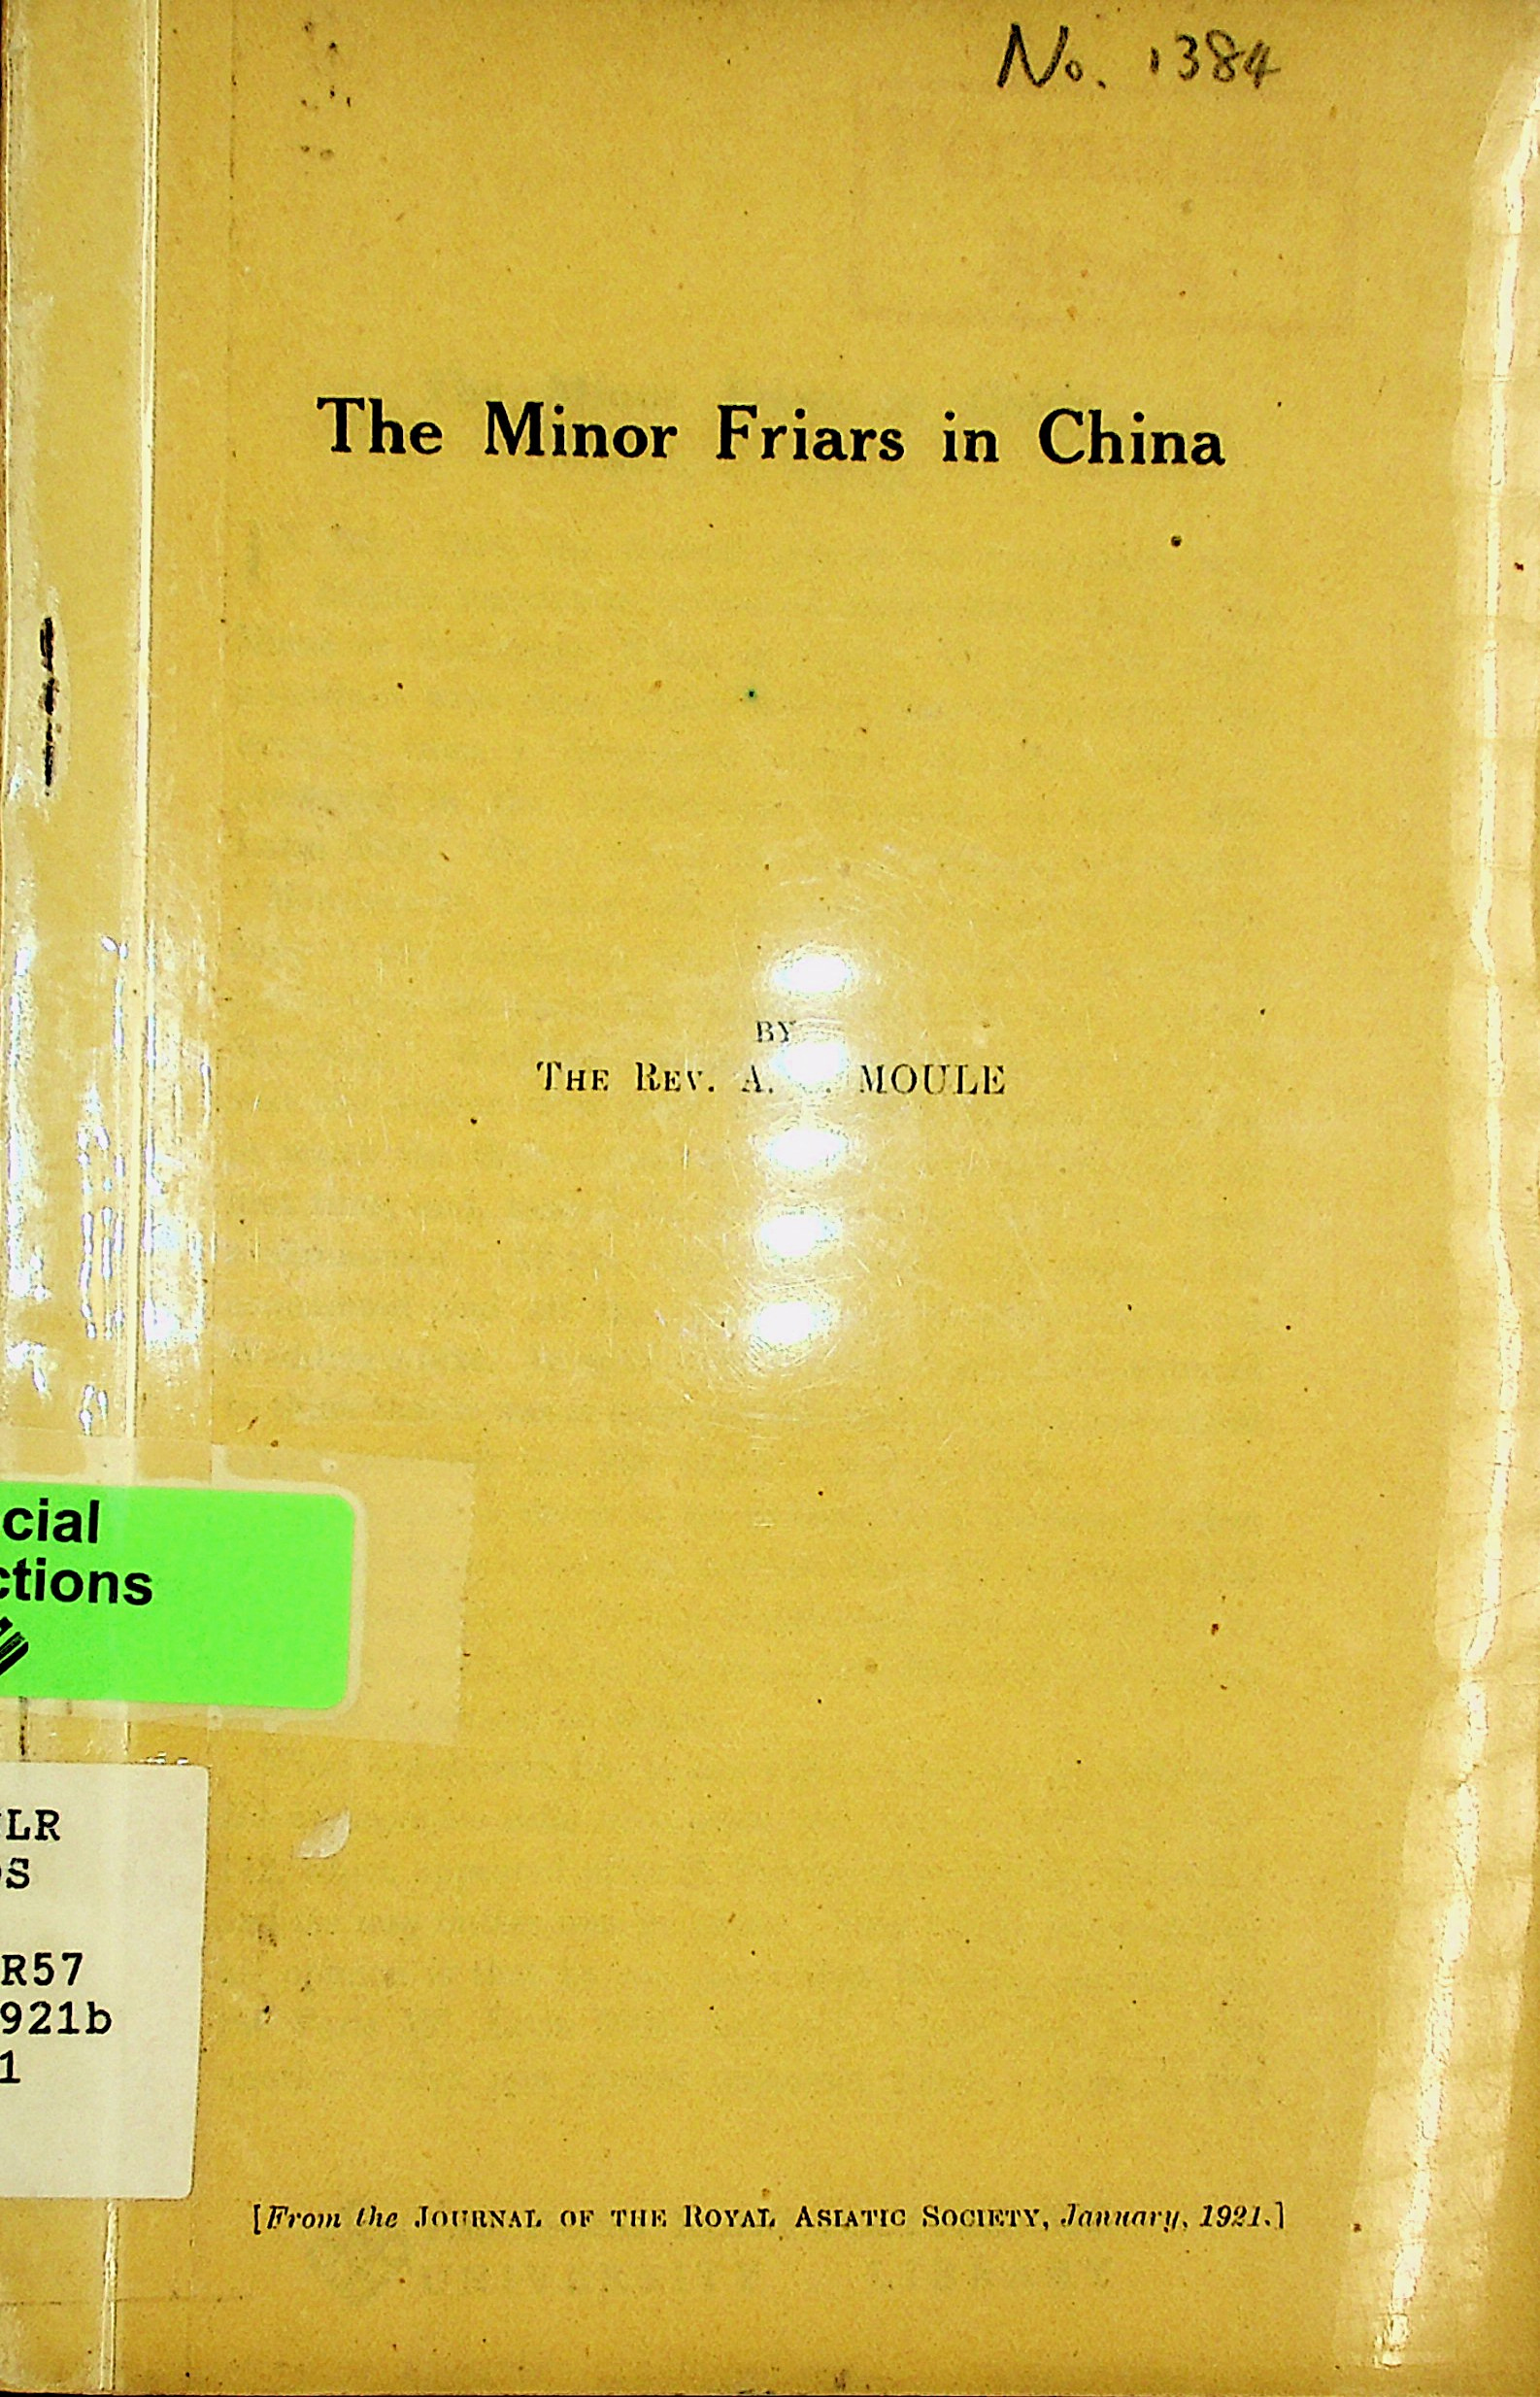 The minor friars in China